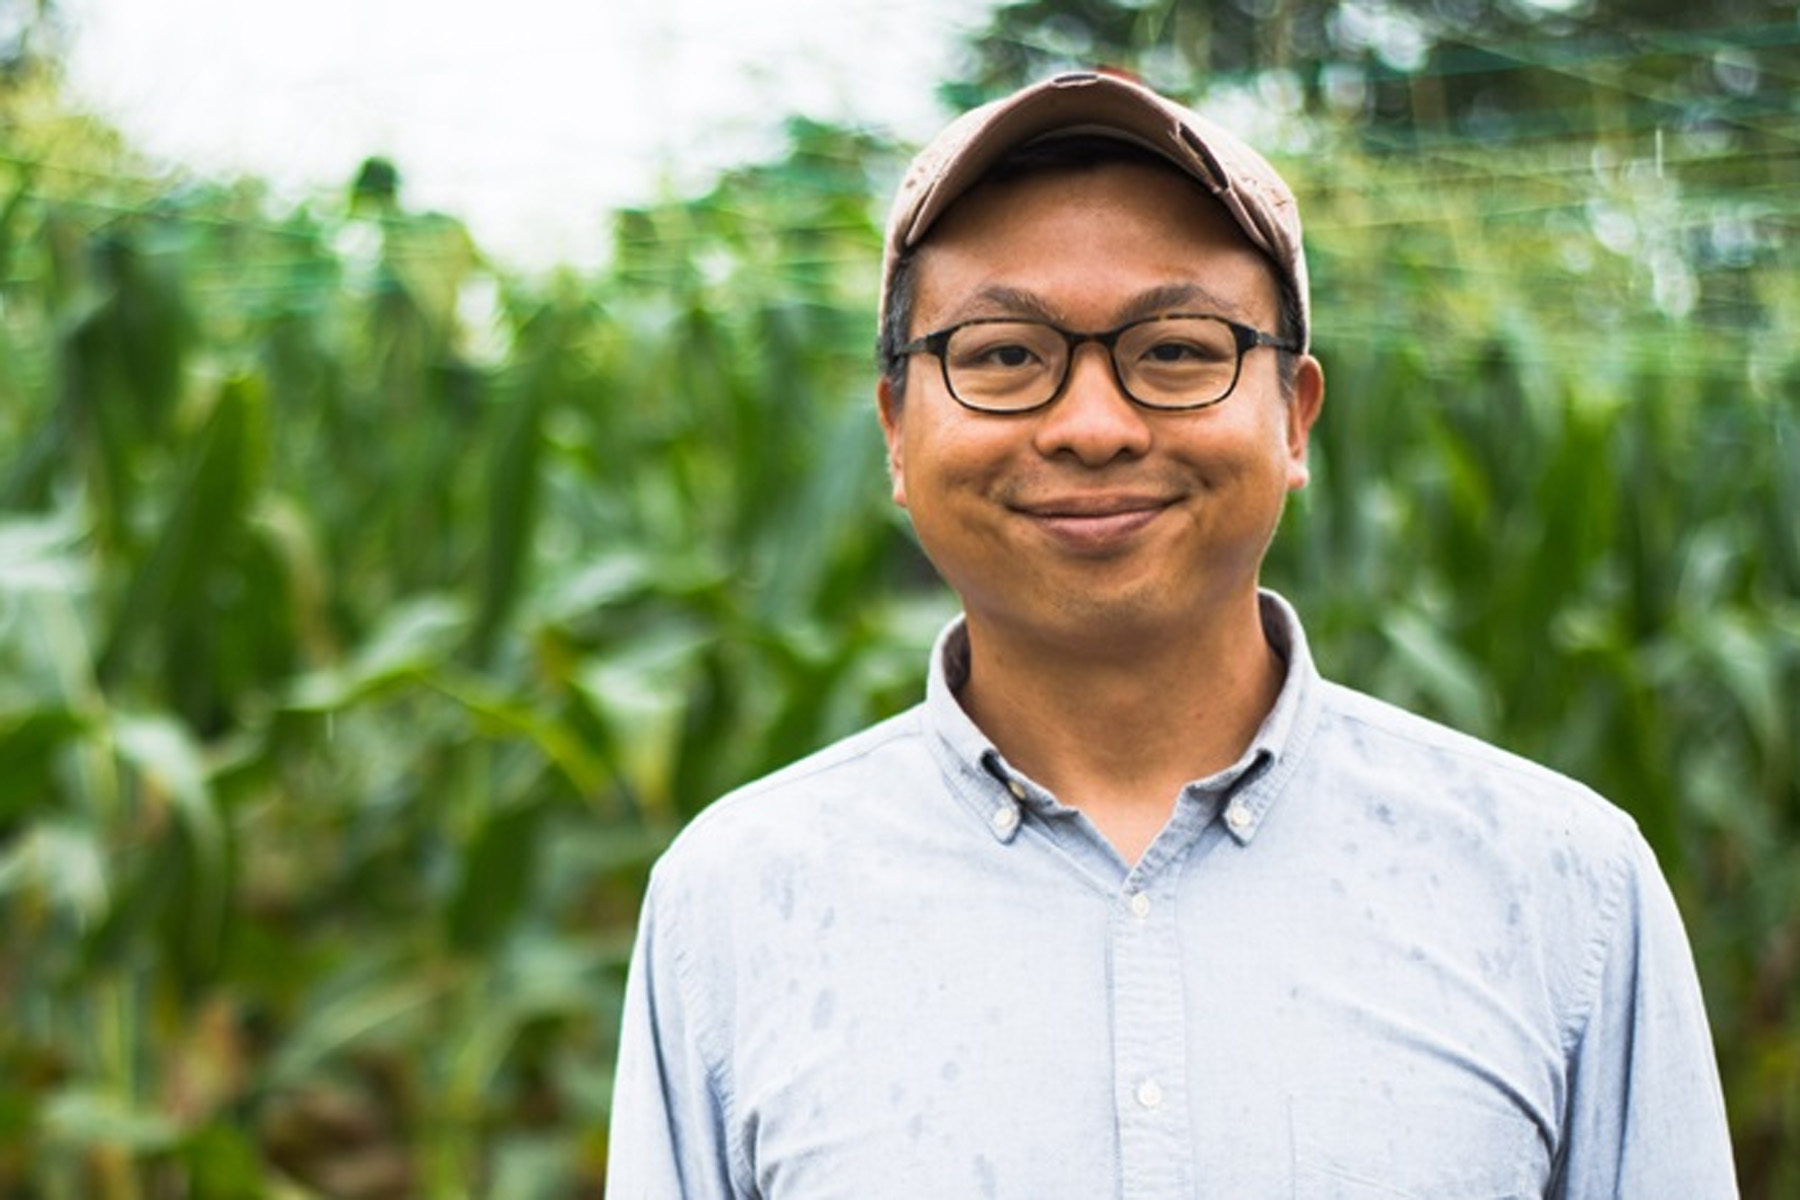 Will Chua, co-founder and the face of FOLO Farm. Source